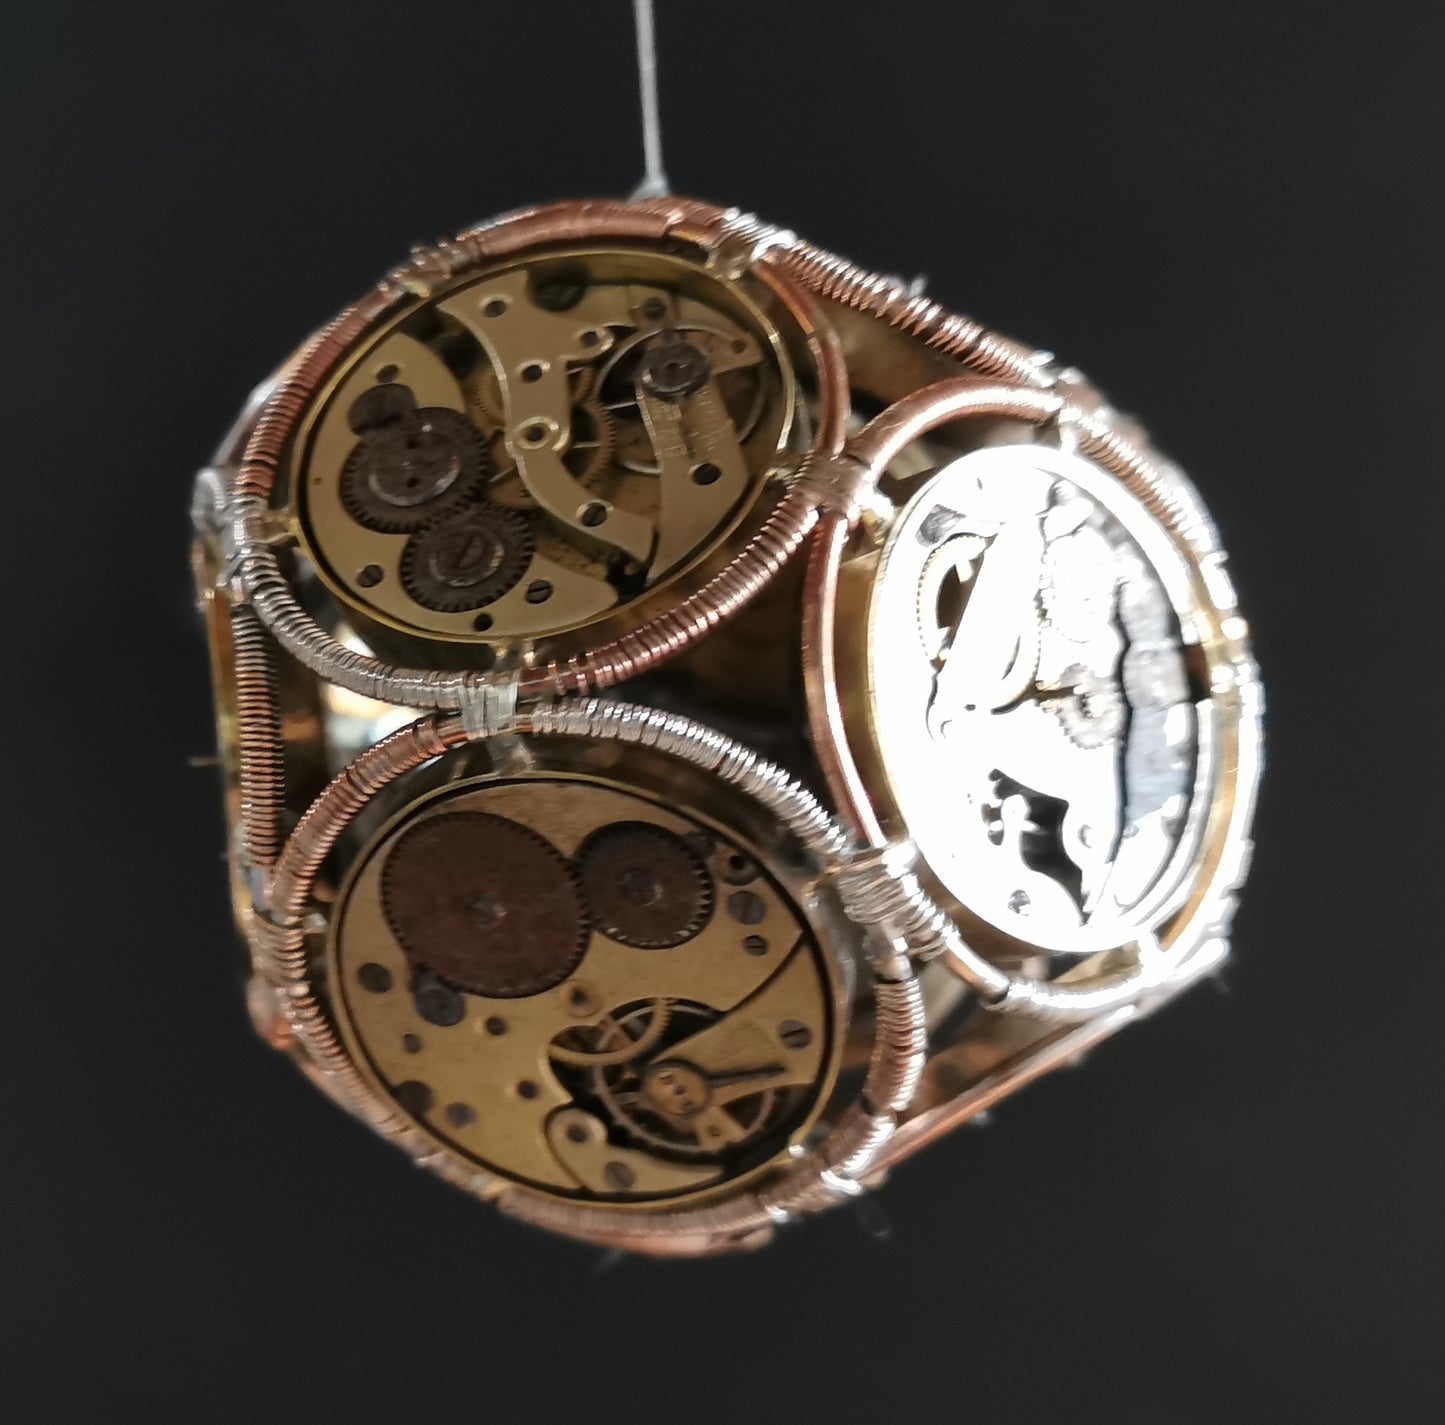 Ref.ST0101 - Dodecahedron-watches in wire wrap